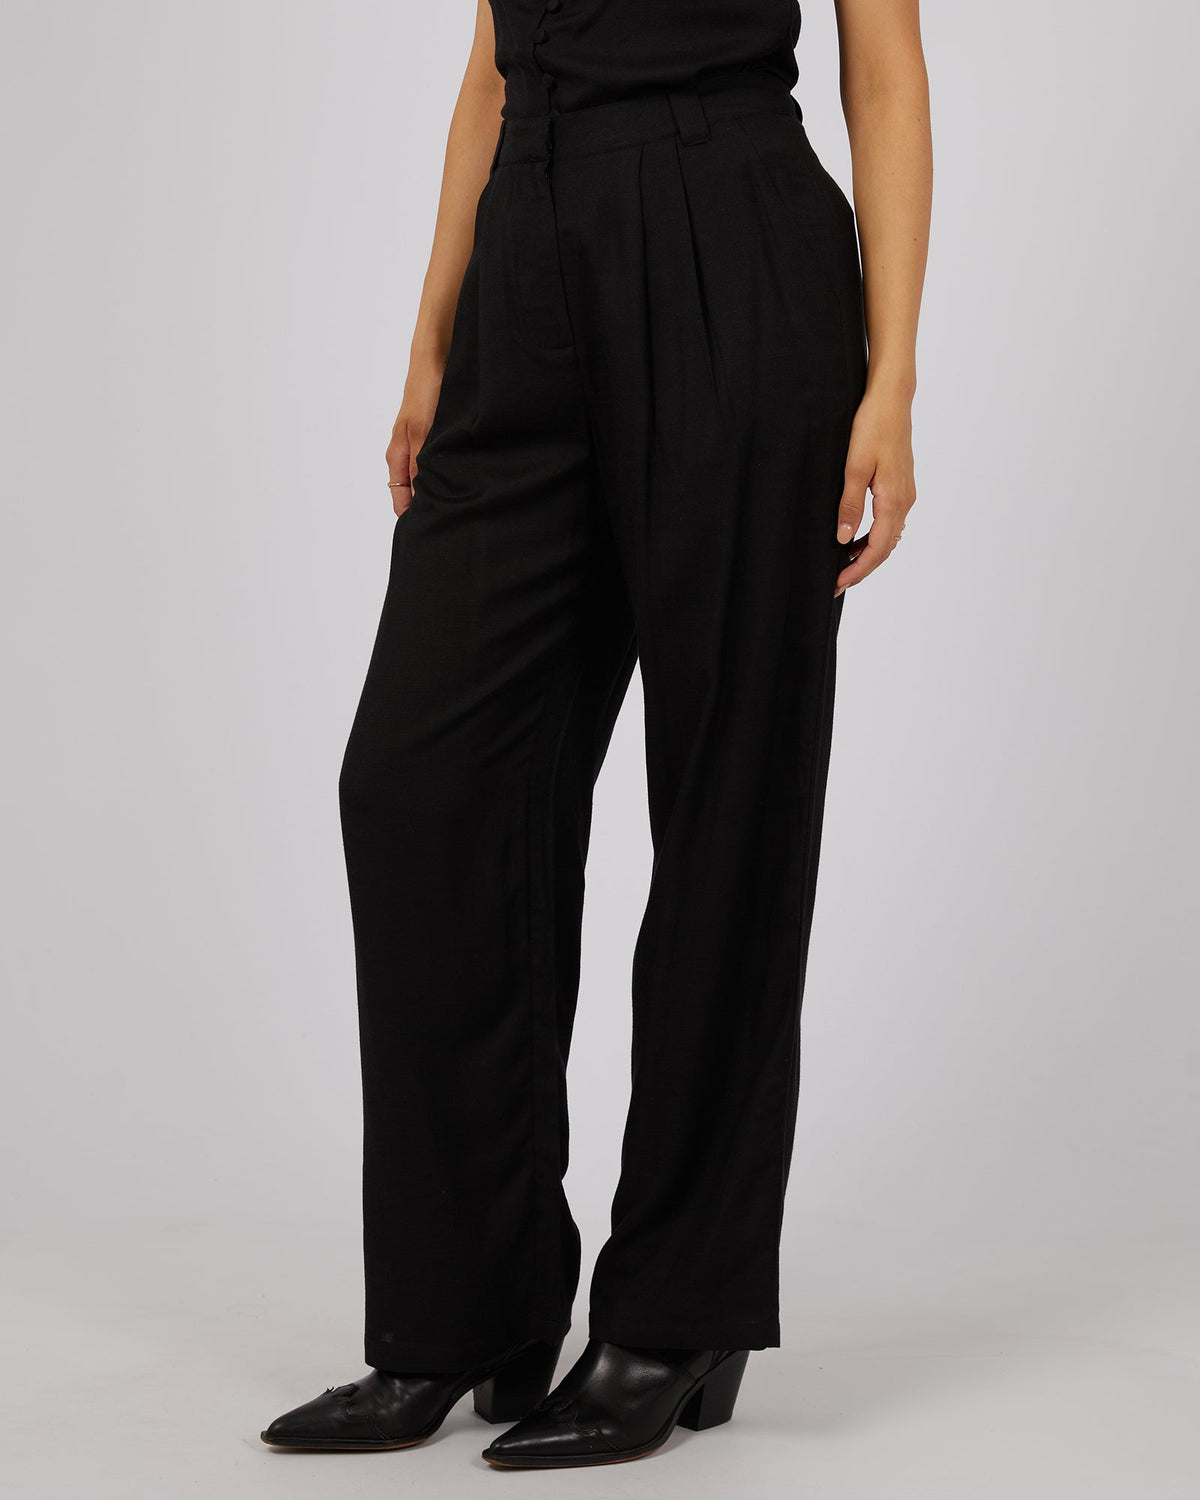 All About Eve-Gracie Pant Black-Edge Clothing